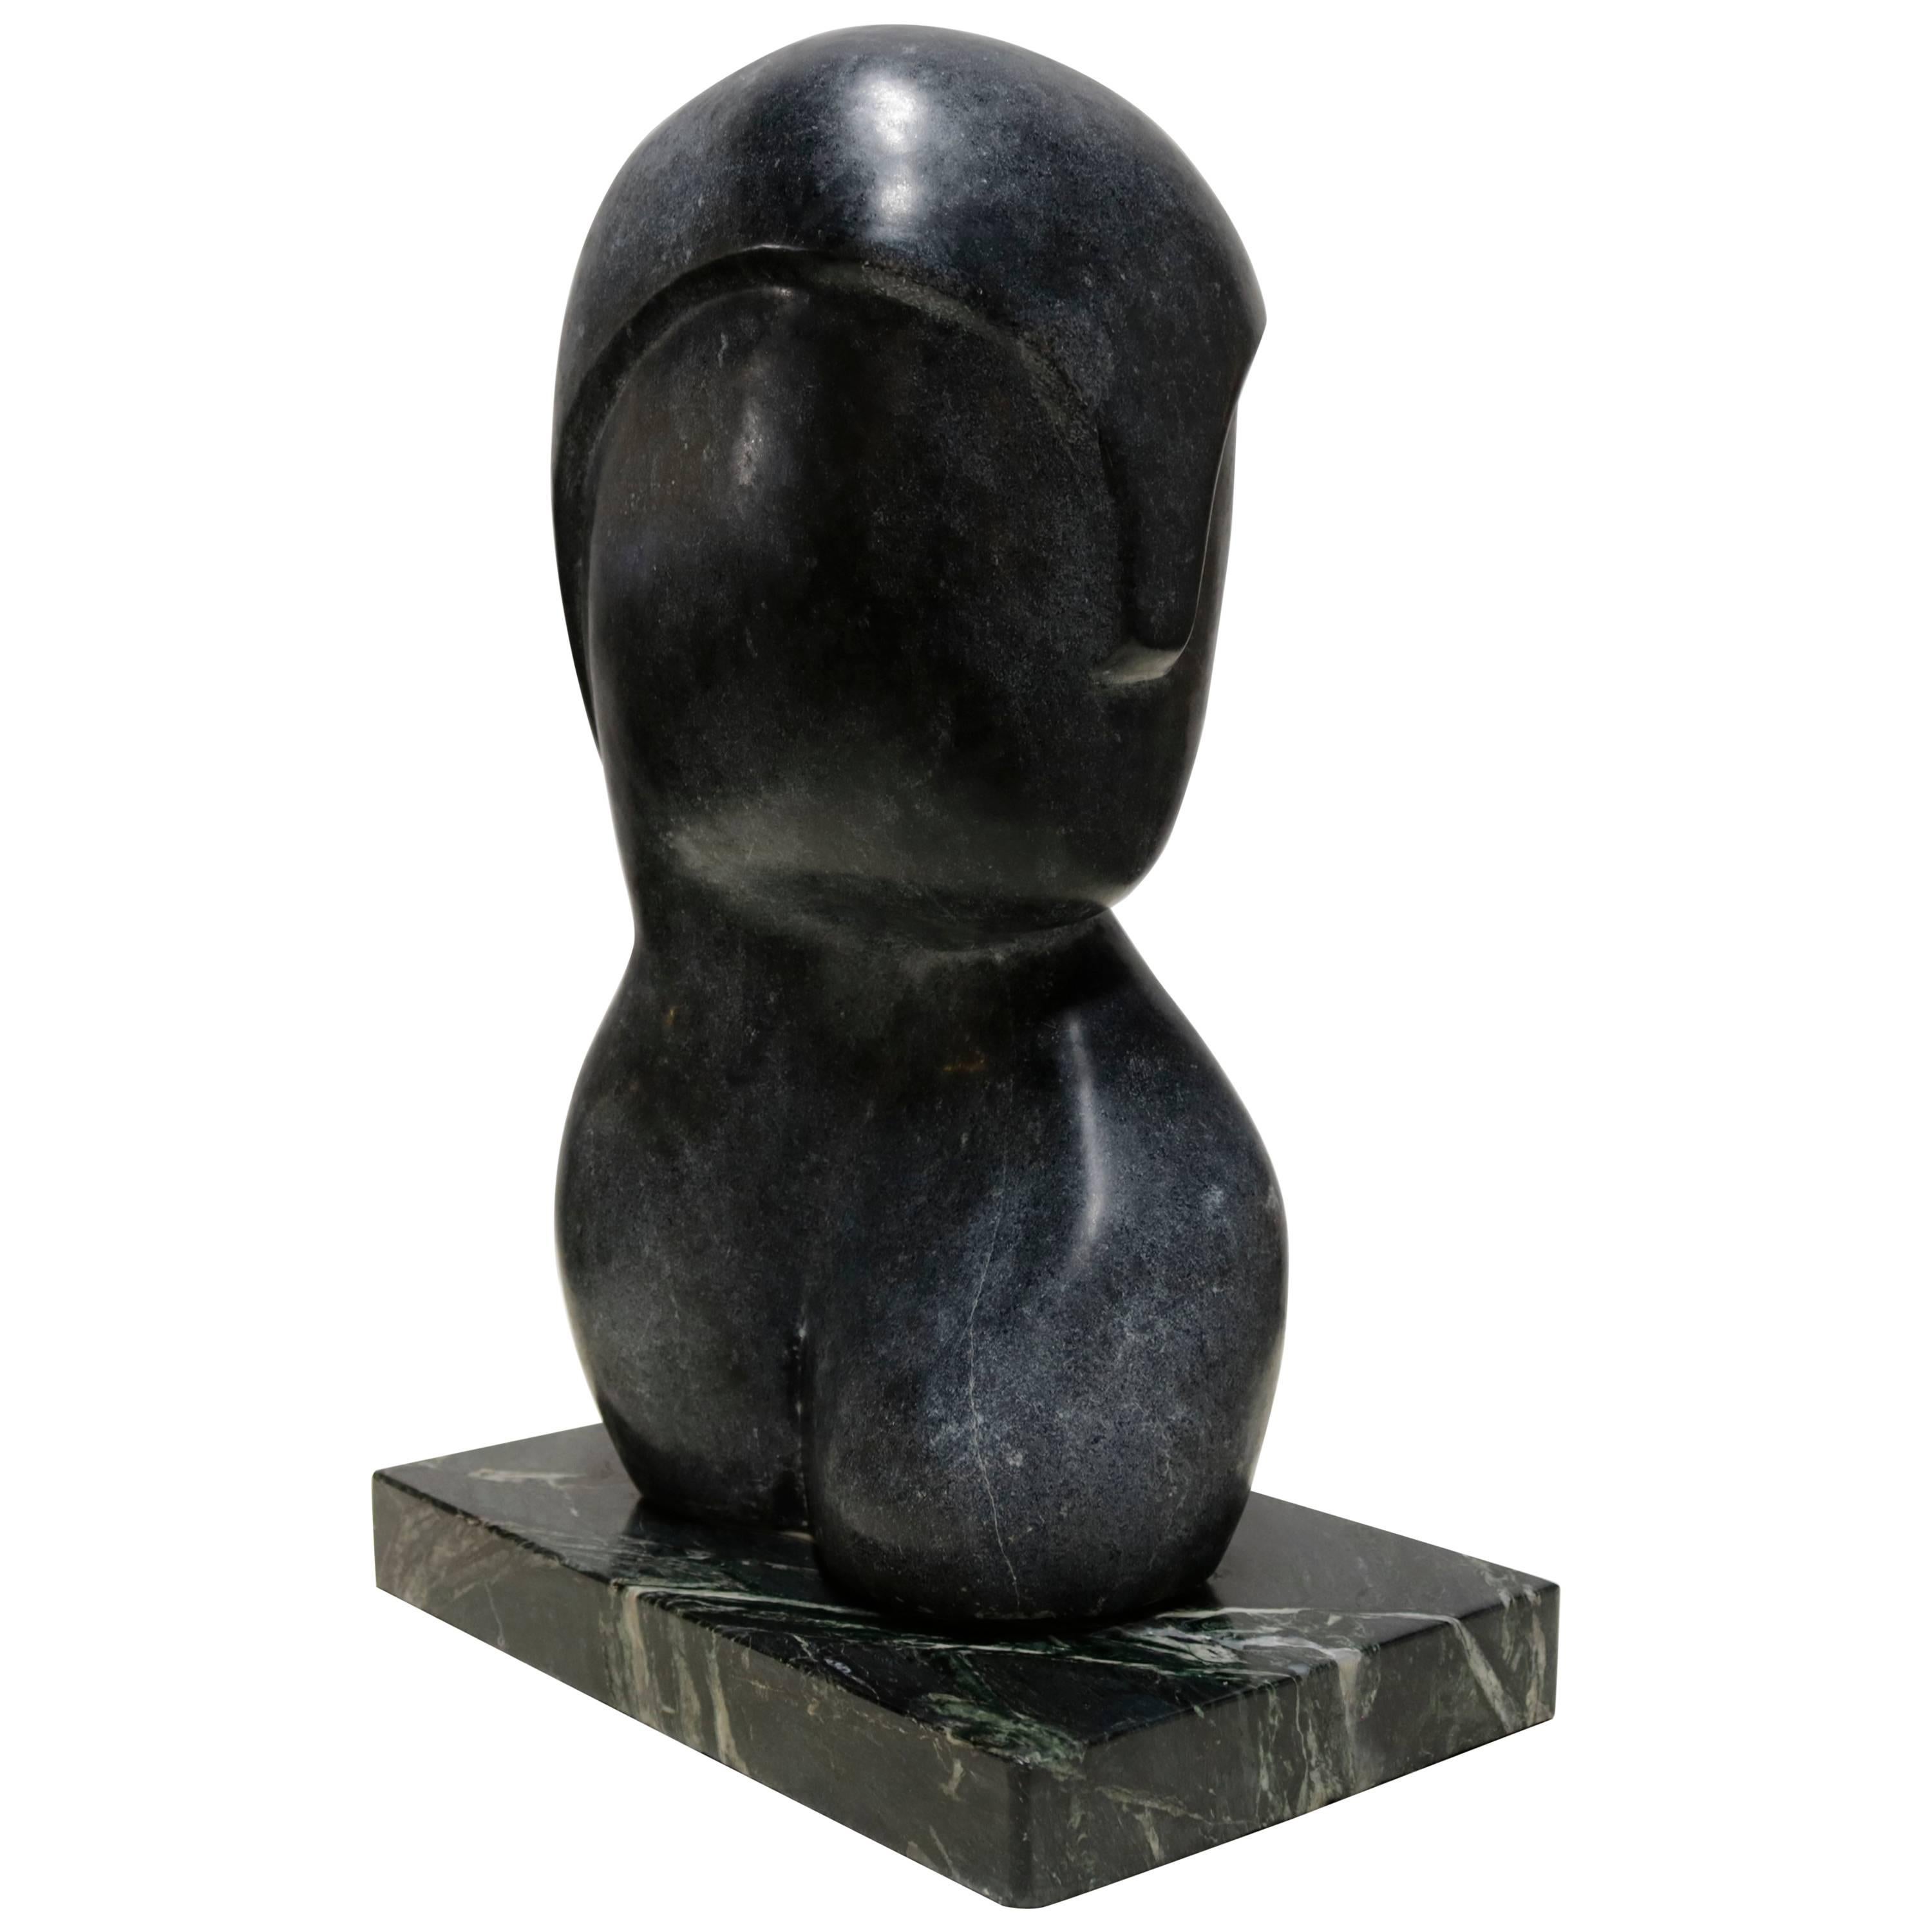 Black Marble Figurative Sculpture Signed "Yospin"